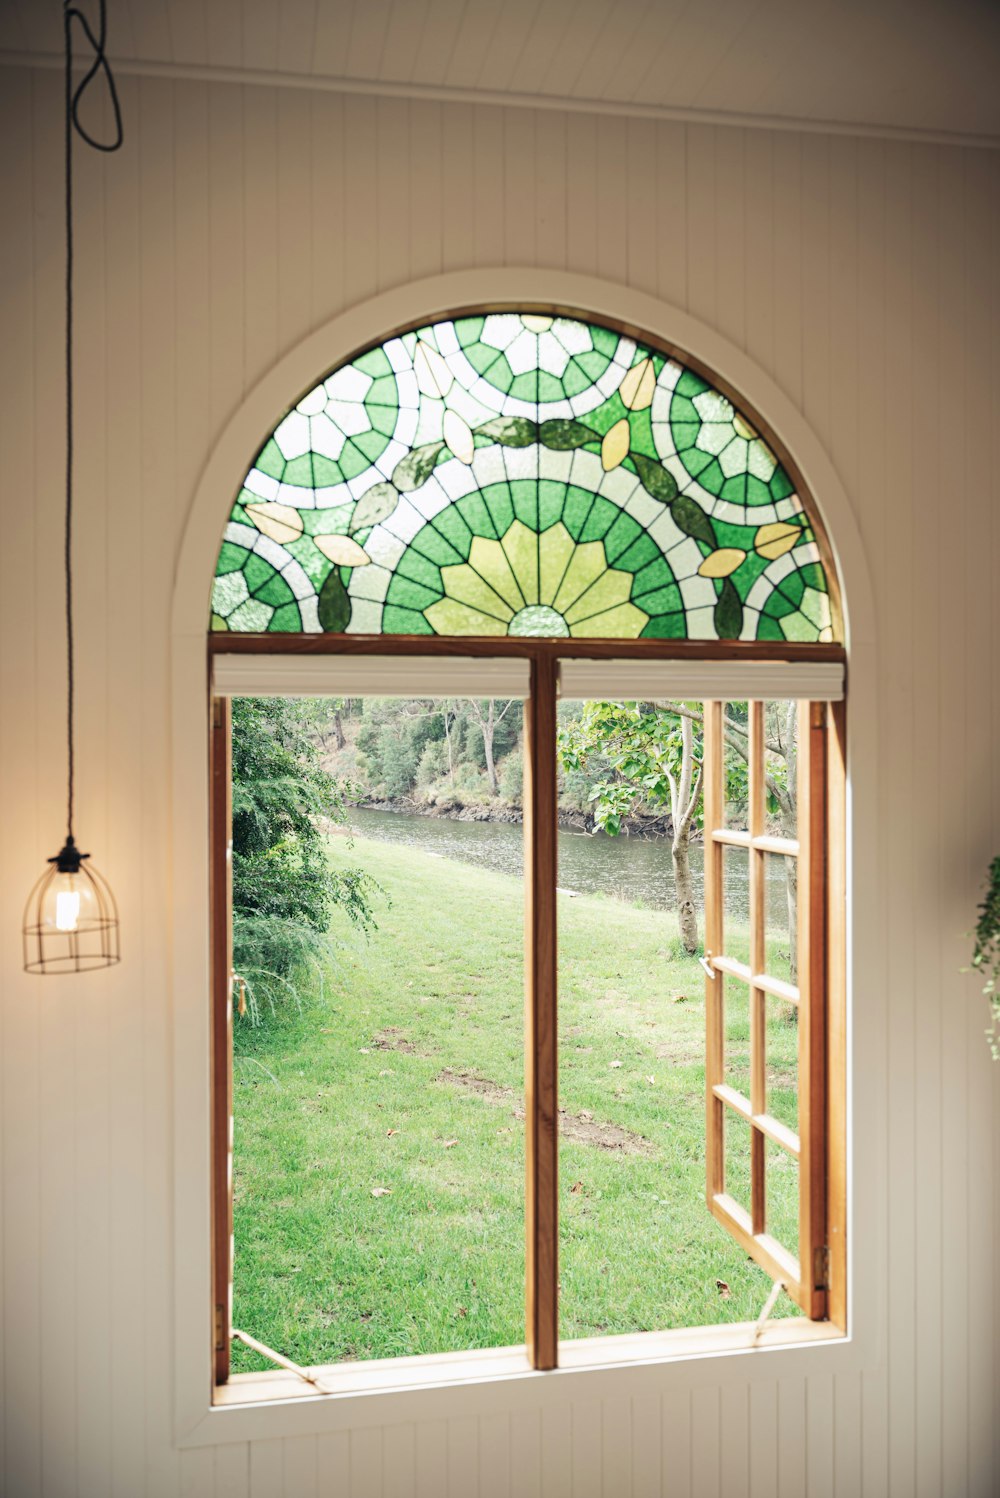 a window with a green and yellow stained glass design